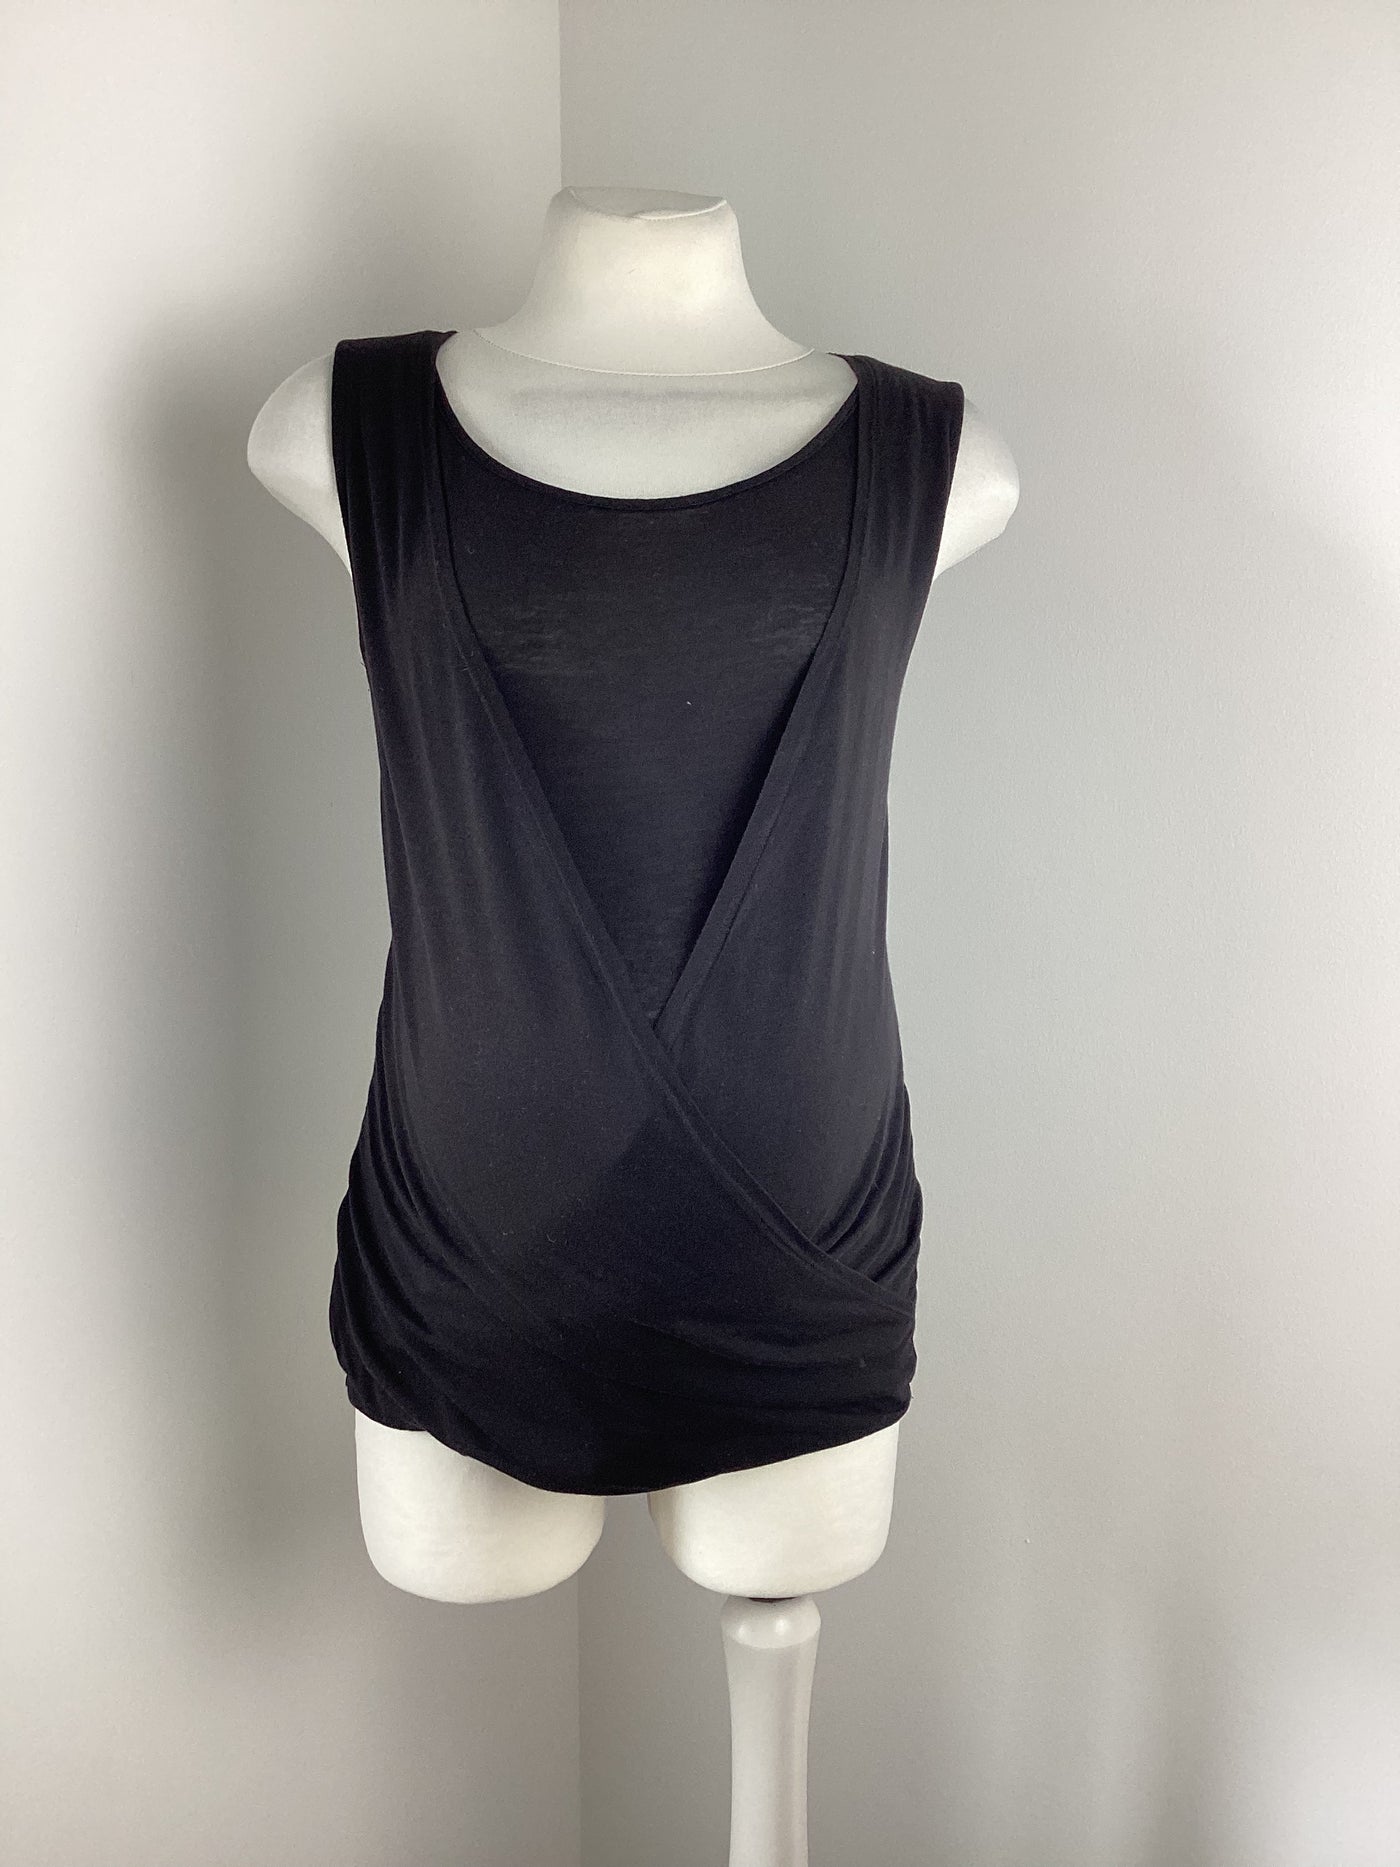 H&M Mama black sleeveless top with cross over front detail - Size S (Approx UK 8-10)